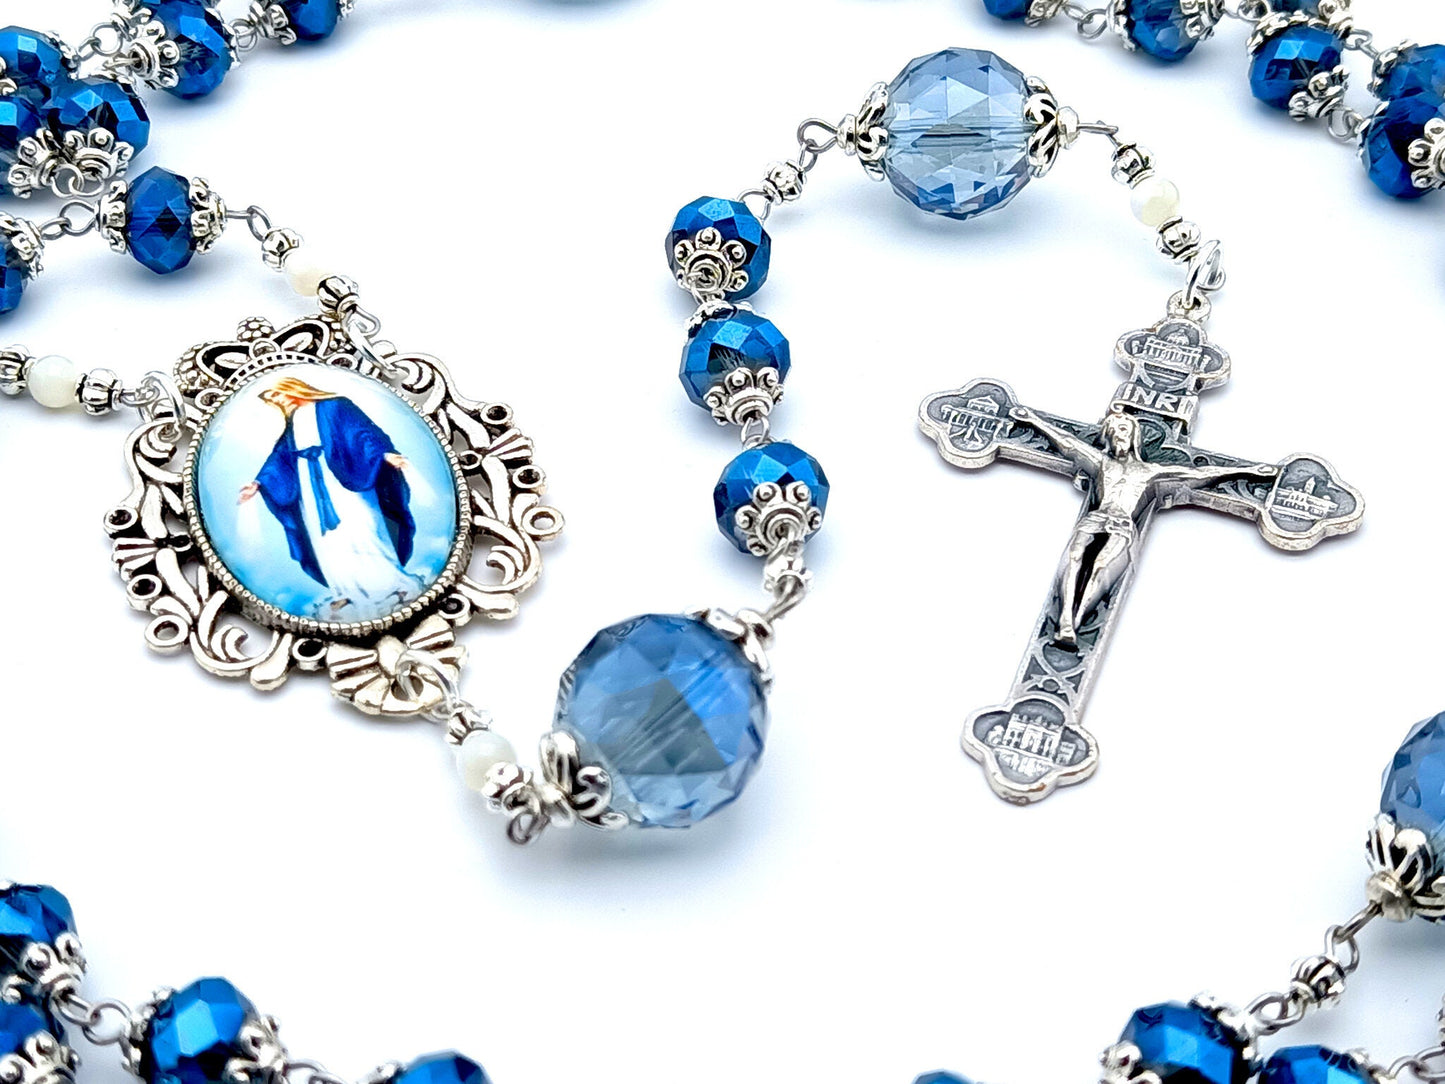 Our Lady of Grace unique rosary beads with blue faceted glass and pearl beads with silver four basilicas crucifix and picture centre medal.